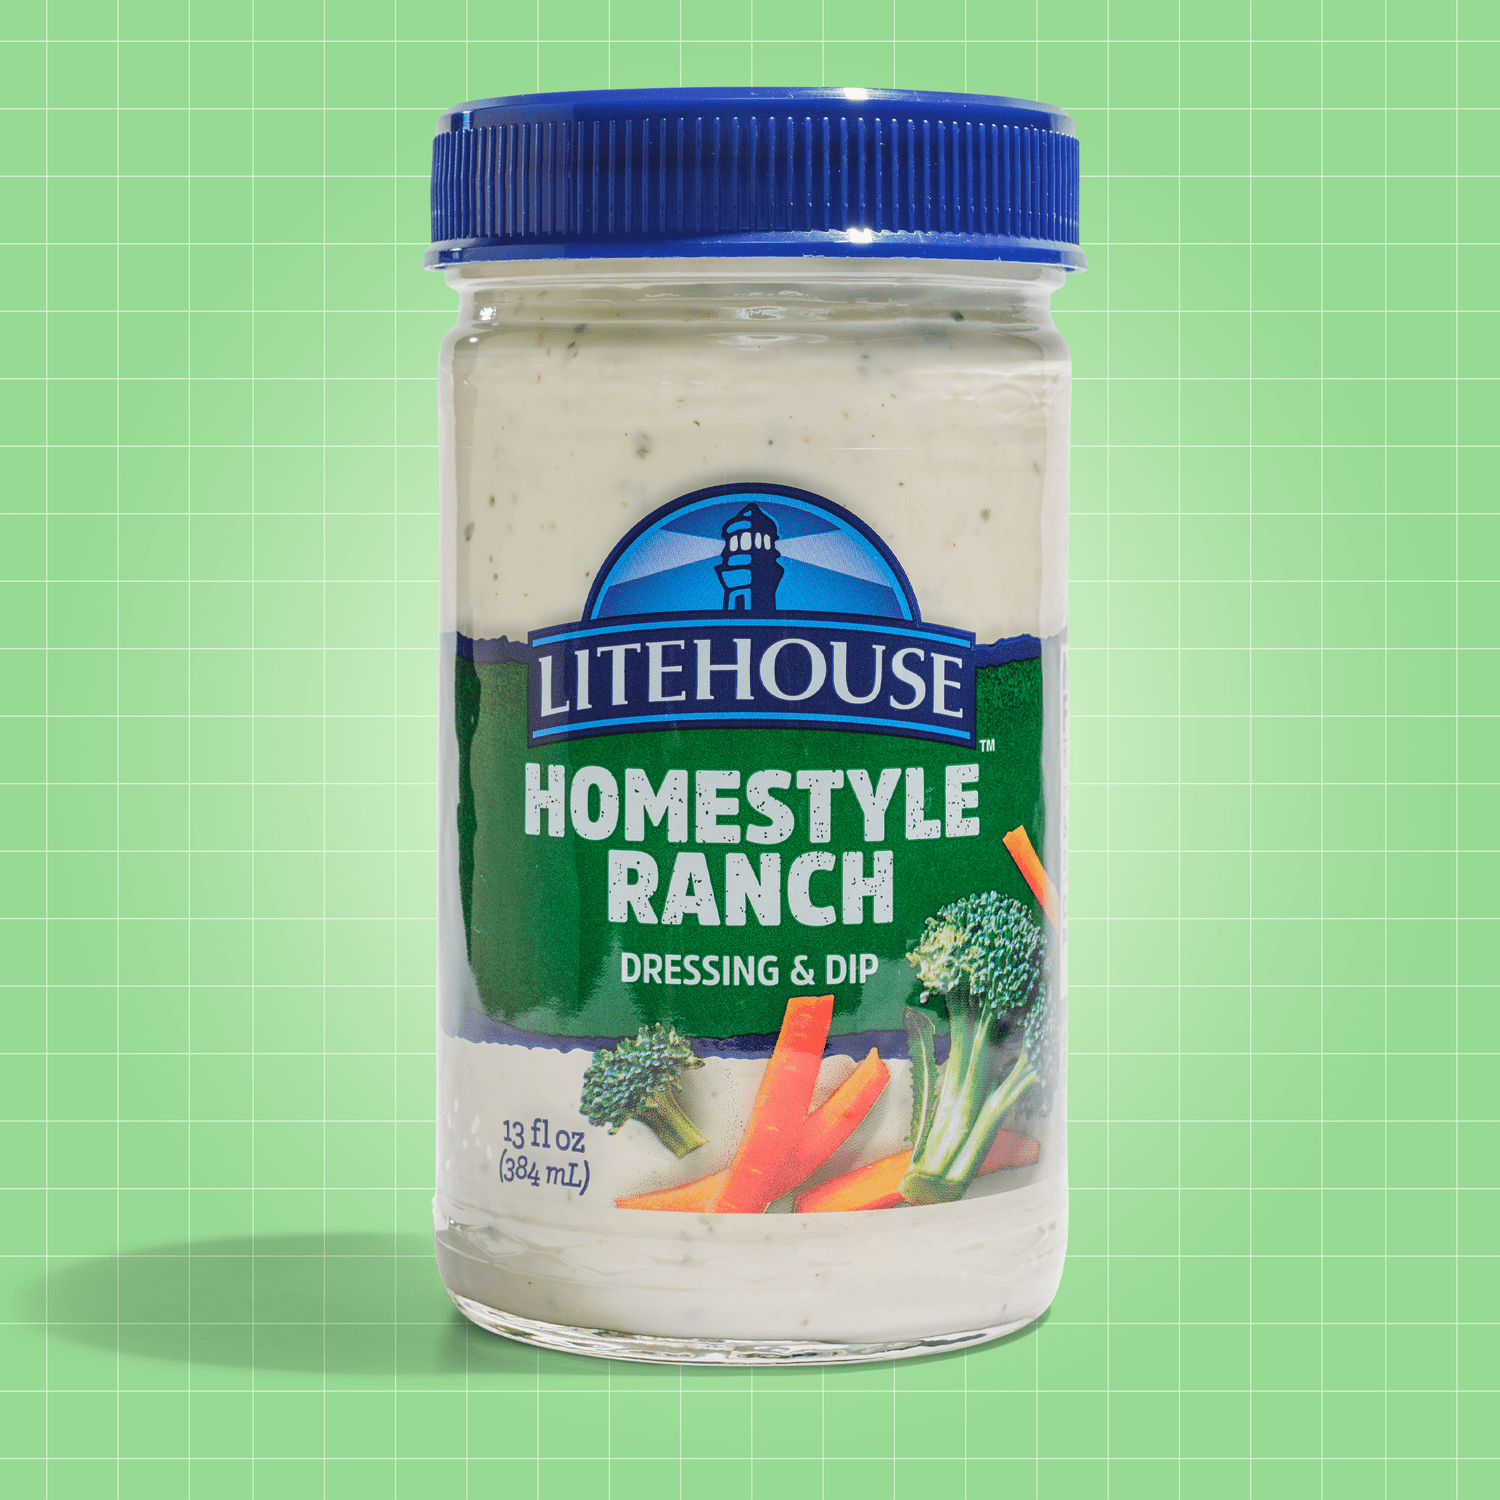 Litehouse Homestyle Ranch